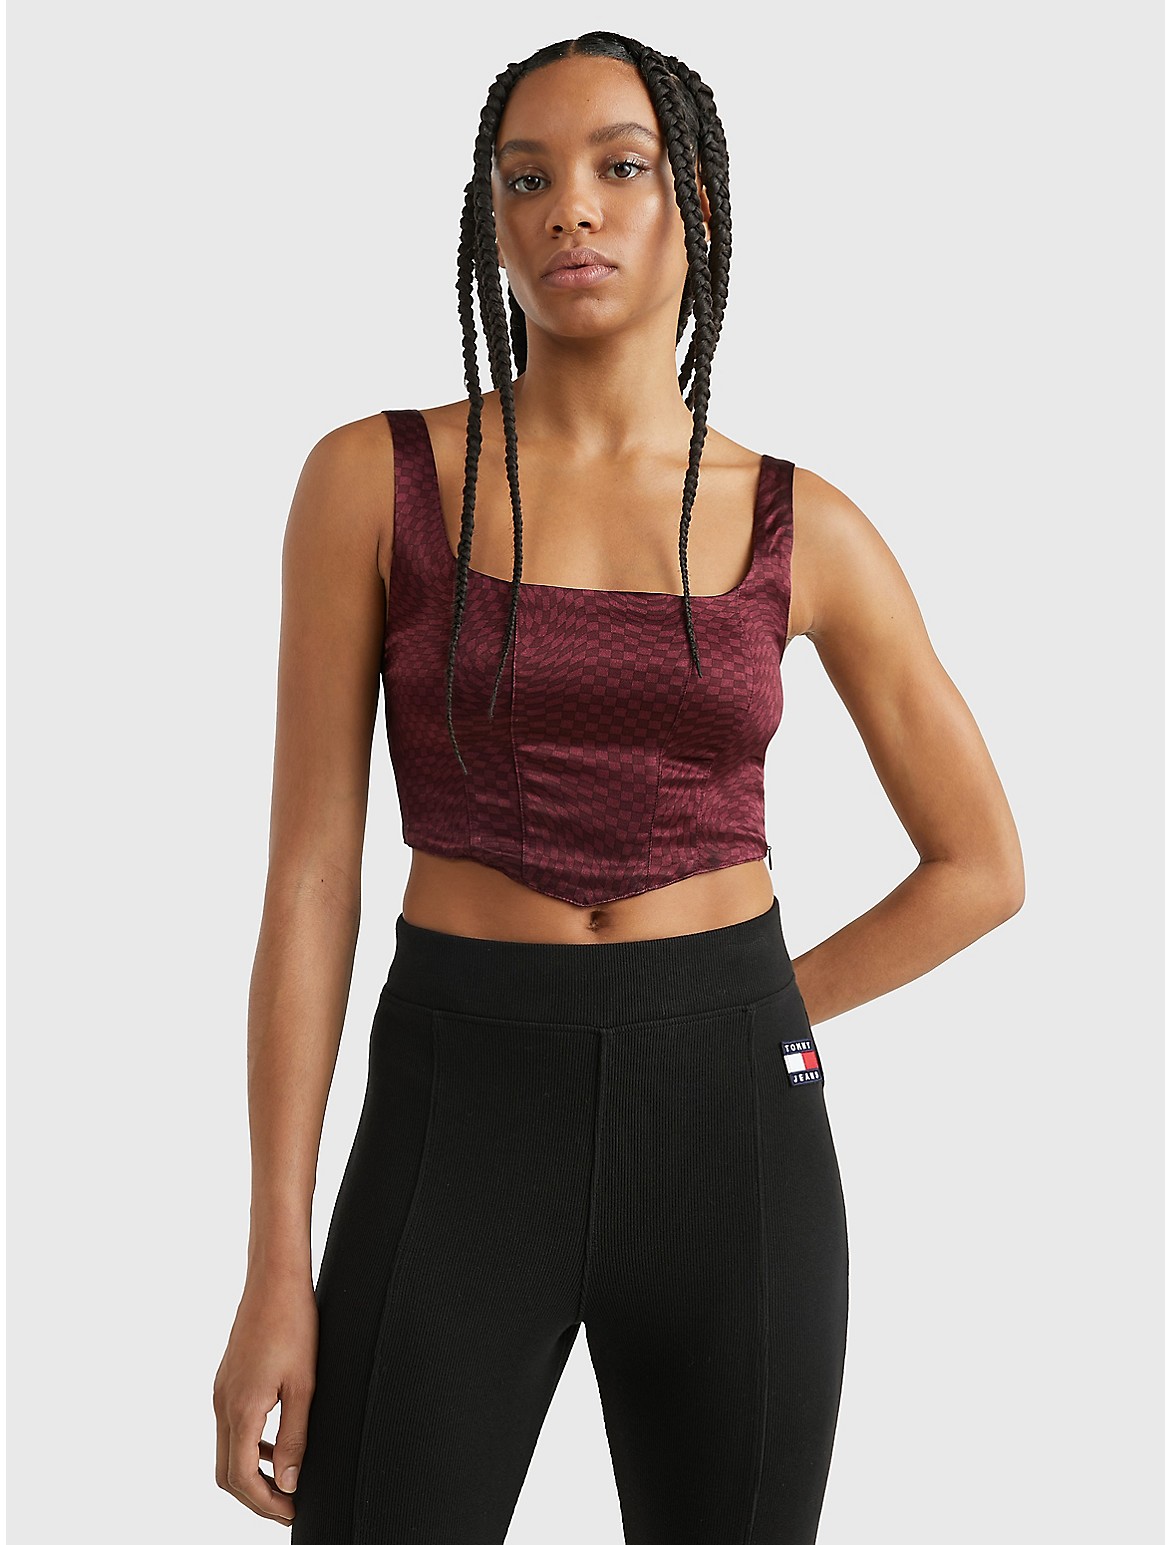 Tommy Hilfiger Women's Cropped Corset Top